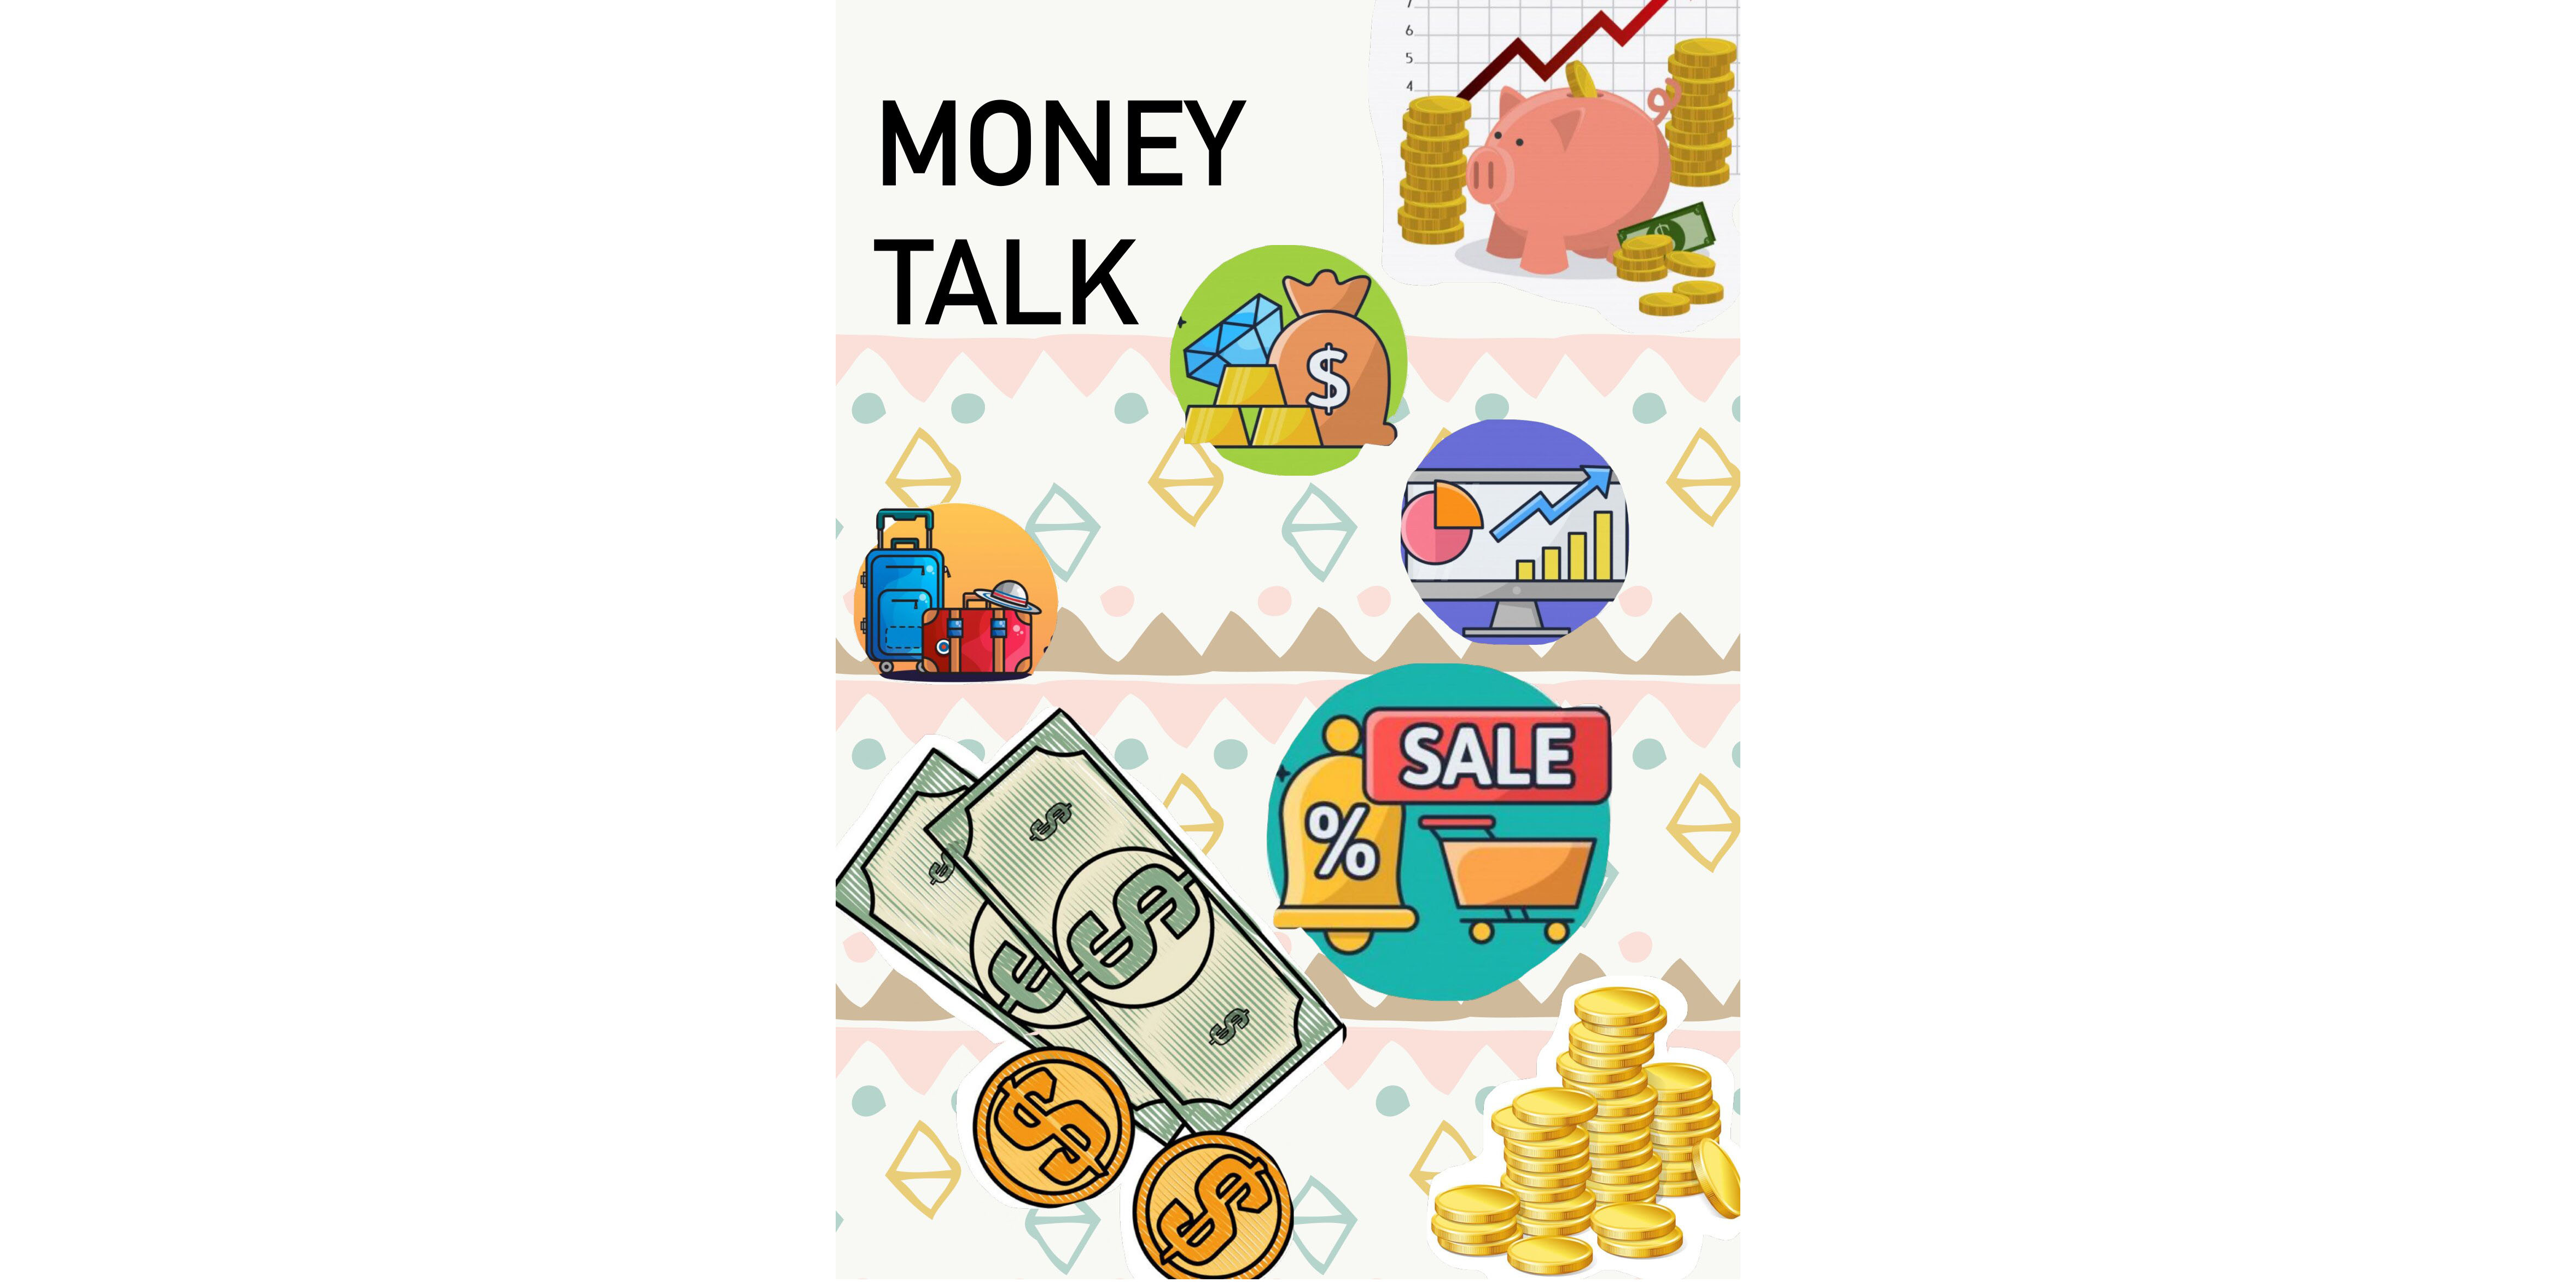 Talking about money